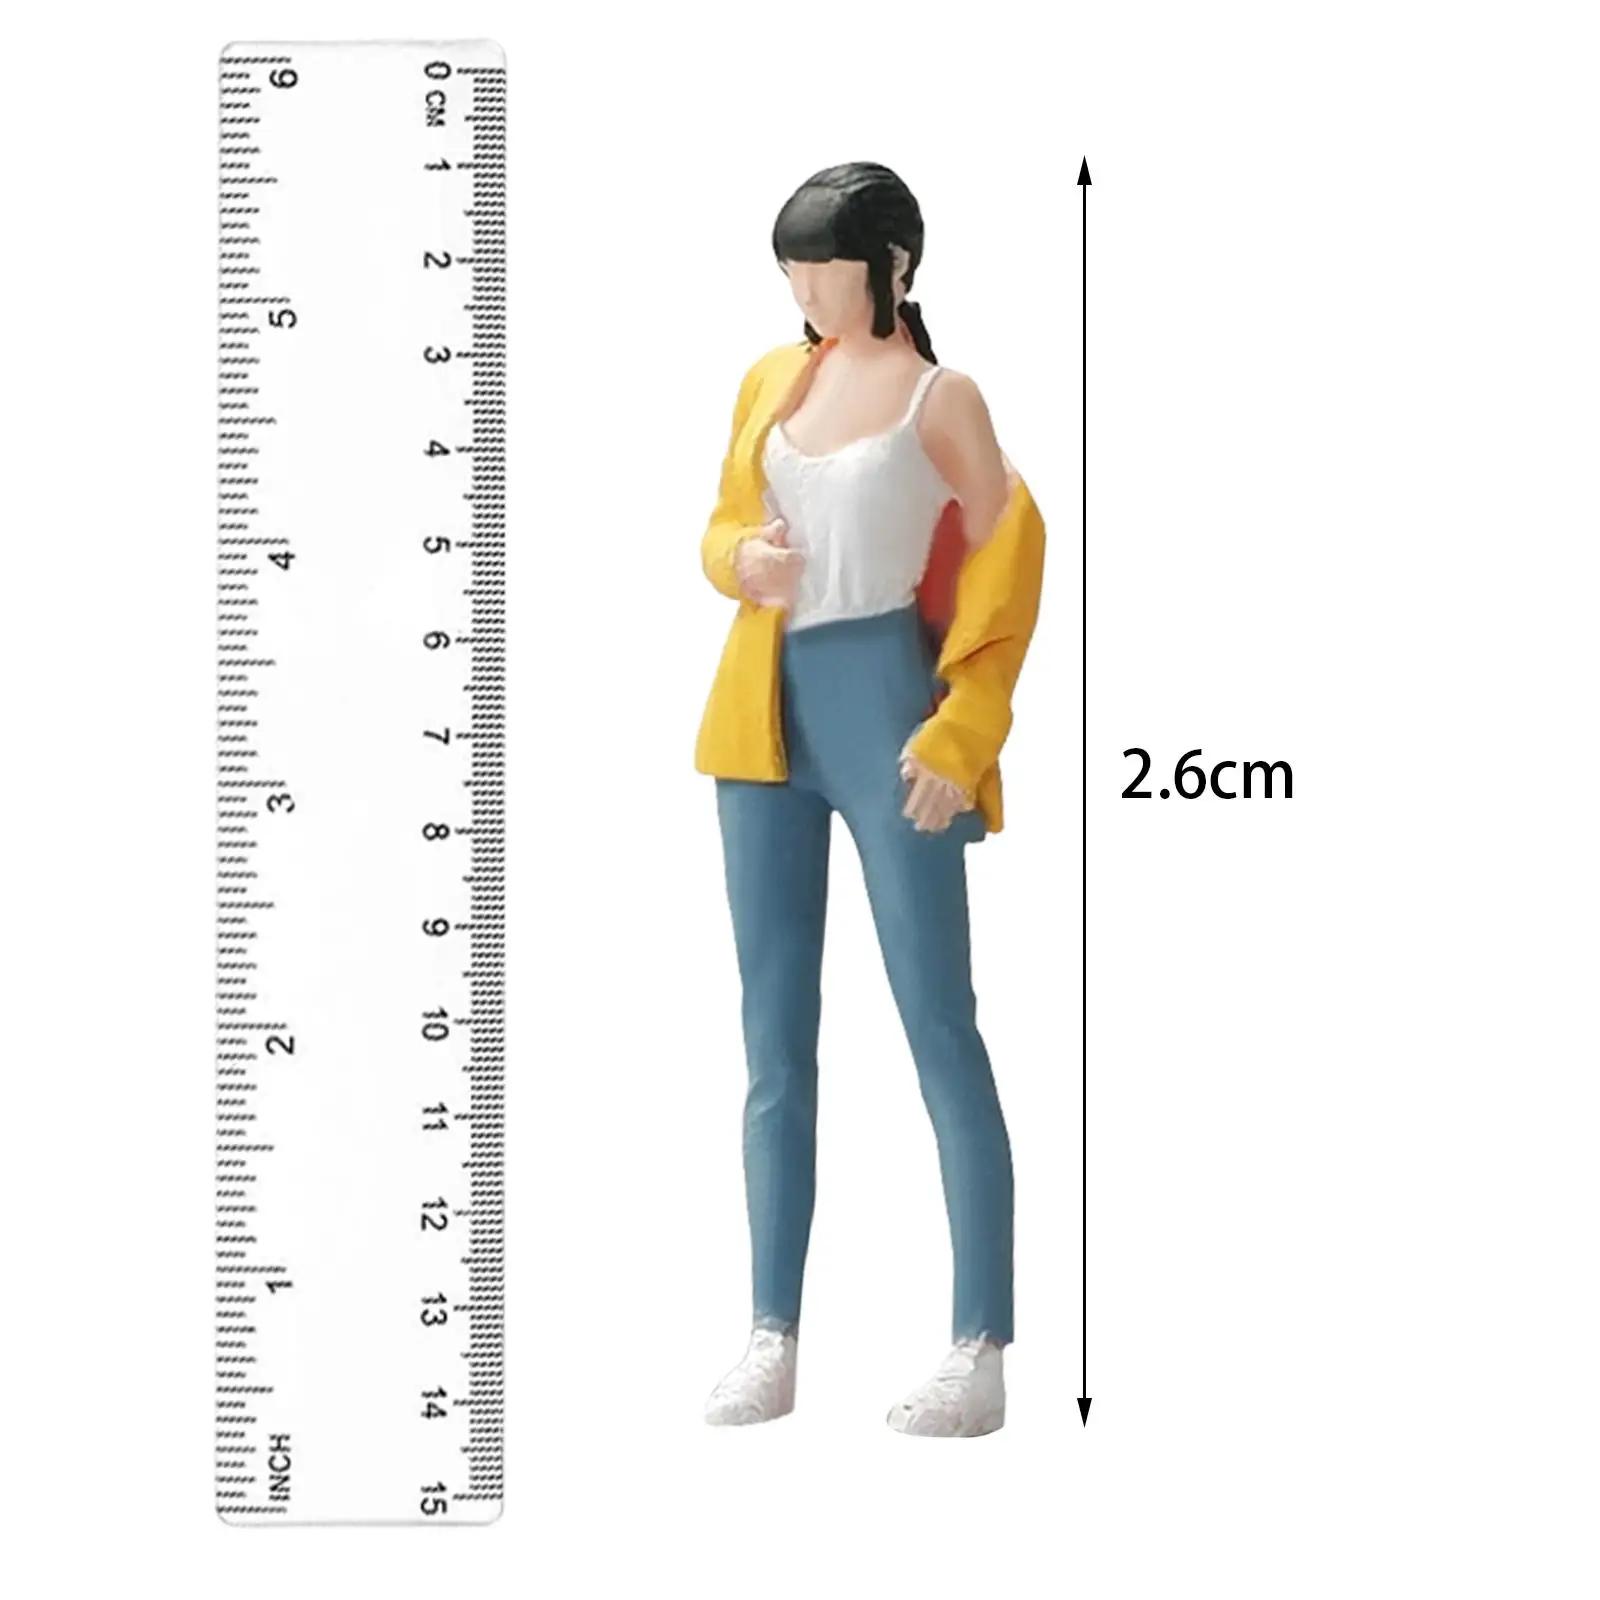 1/64 Girl Figure Tiny People Pose Scene DIY Layout Scenery Accs Movie Props Miniature DIY Projects Accessory Diorama Layout